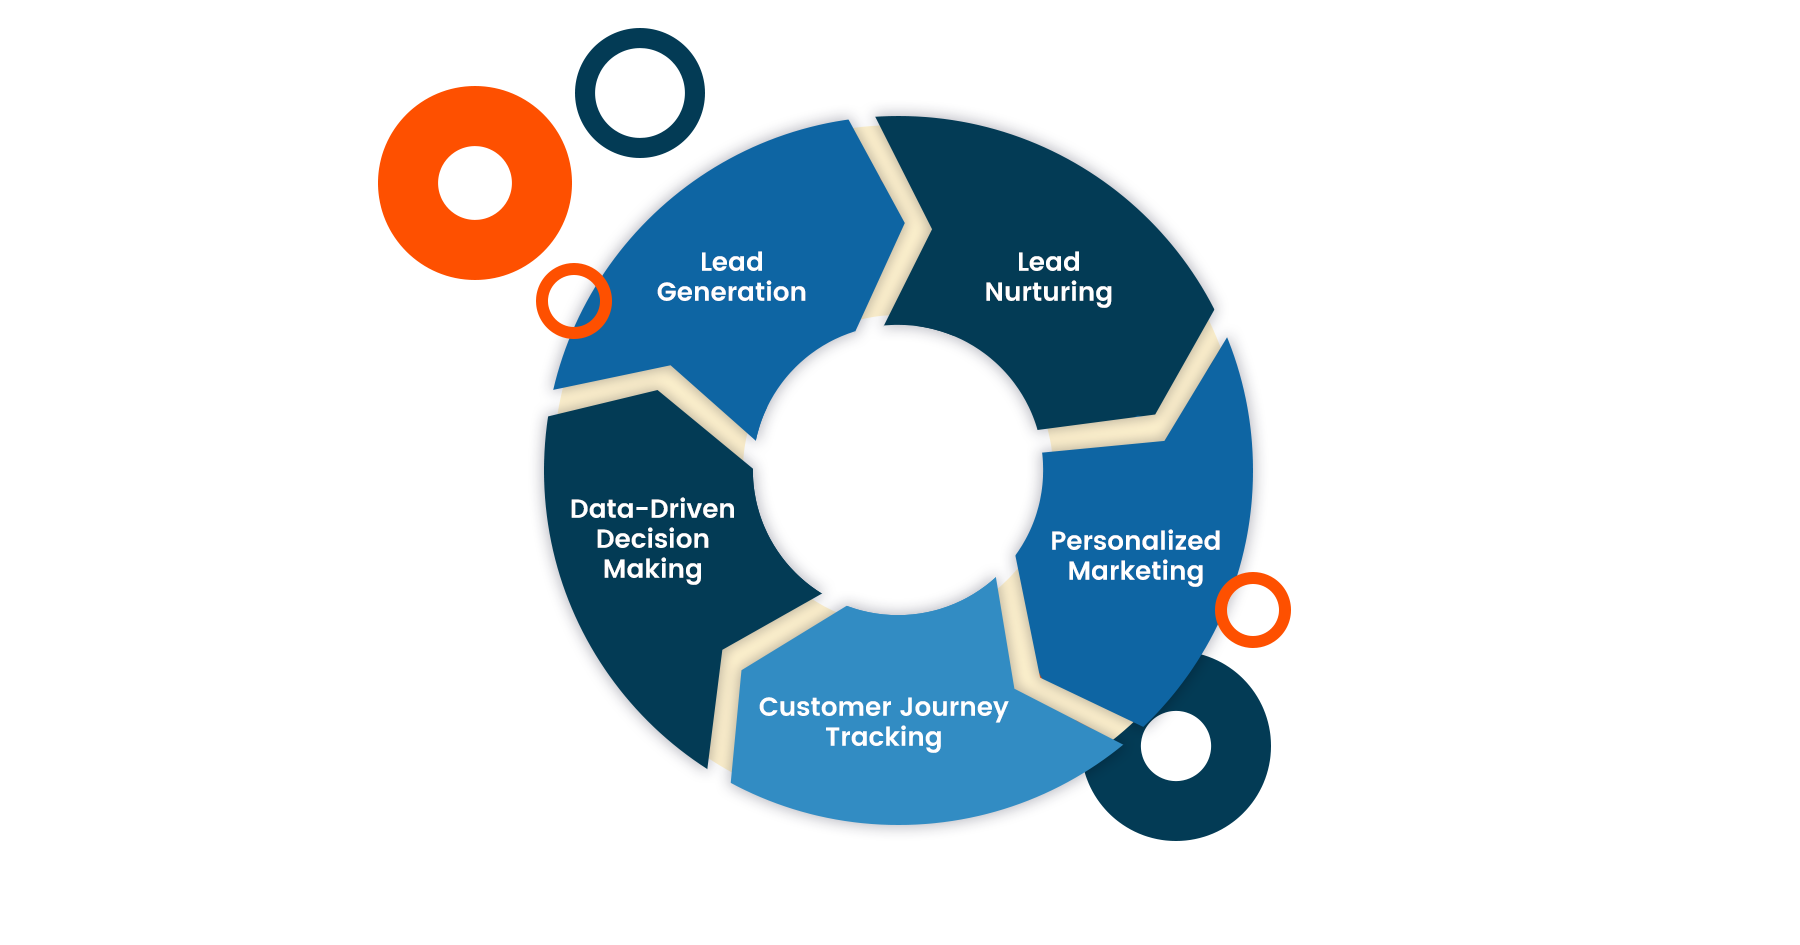 A wheel with arrows depicting the components of how start-ups can use CRM and marketing automation. The components include: lead generation lead nurturing personalized marketing customer journey tracking data-driven decision making